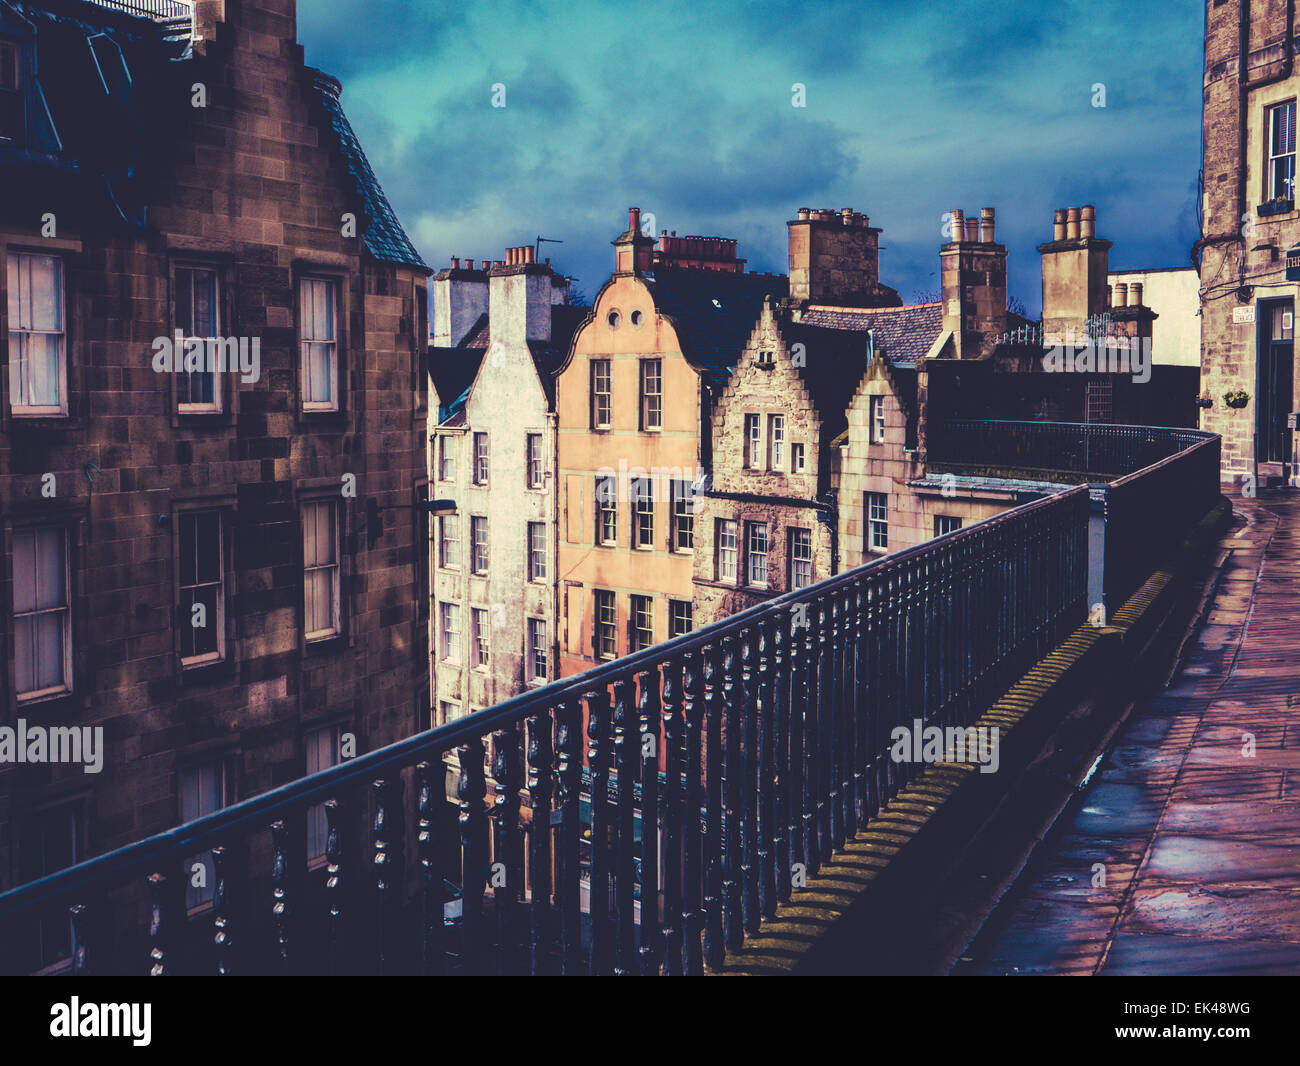 Retro FIltered Photo Of Historic Buildings On Victoria Street In The Old Town, Edinburgh Stock Photo